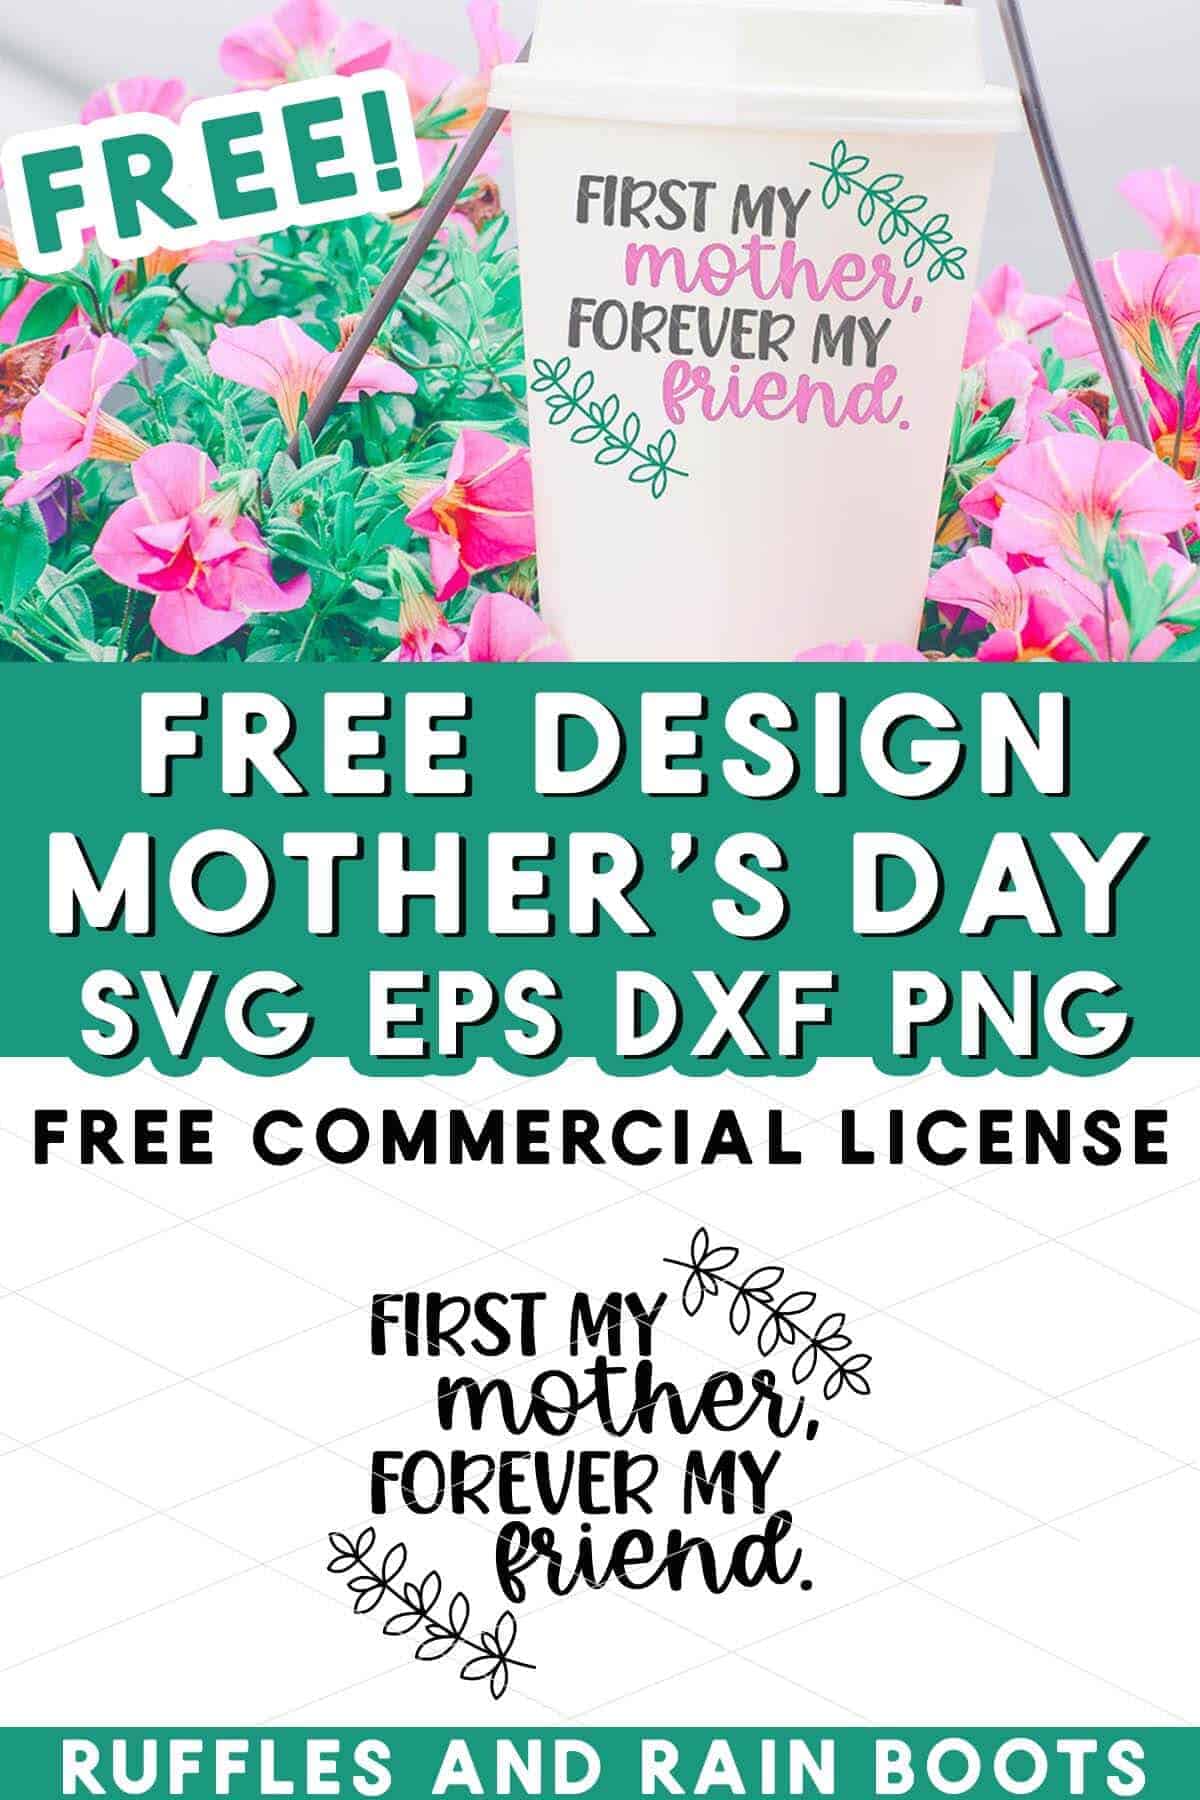 Vertical stacked image showing a first mother forever friend SVG with laurels on bottom and the image in vinyl on white travel cup on top with text which reads free design mother's day SVG.